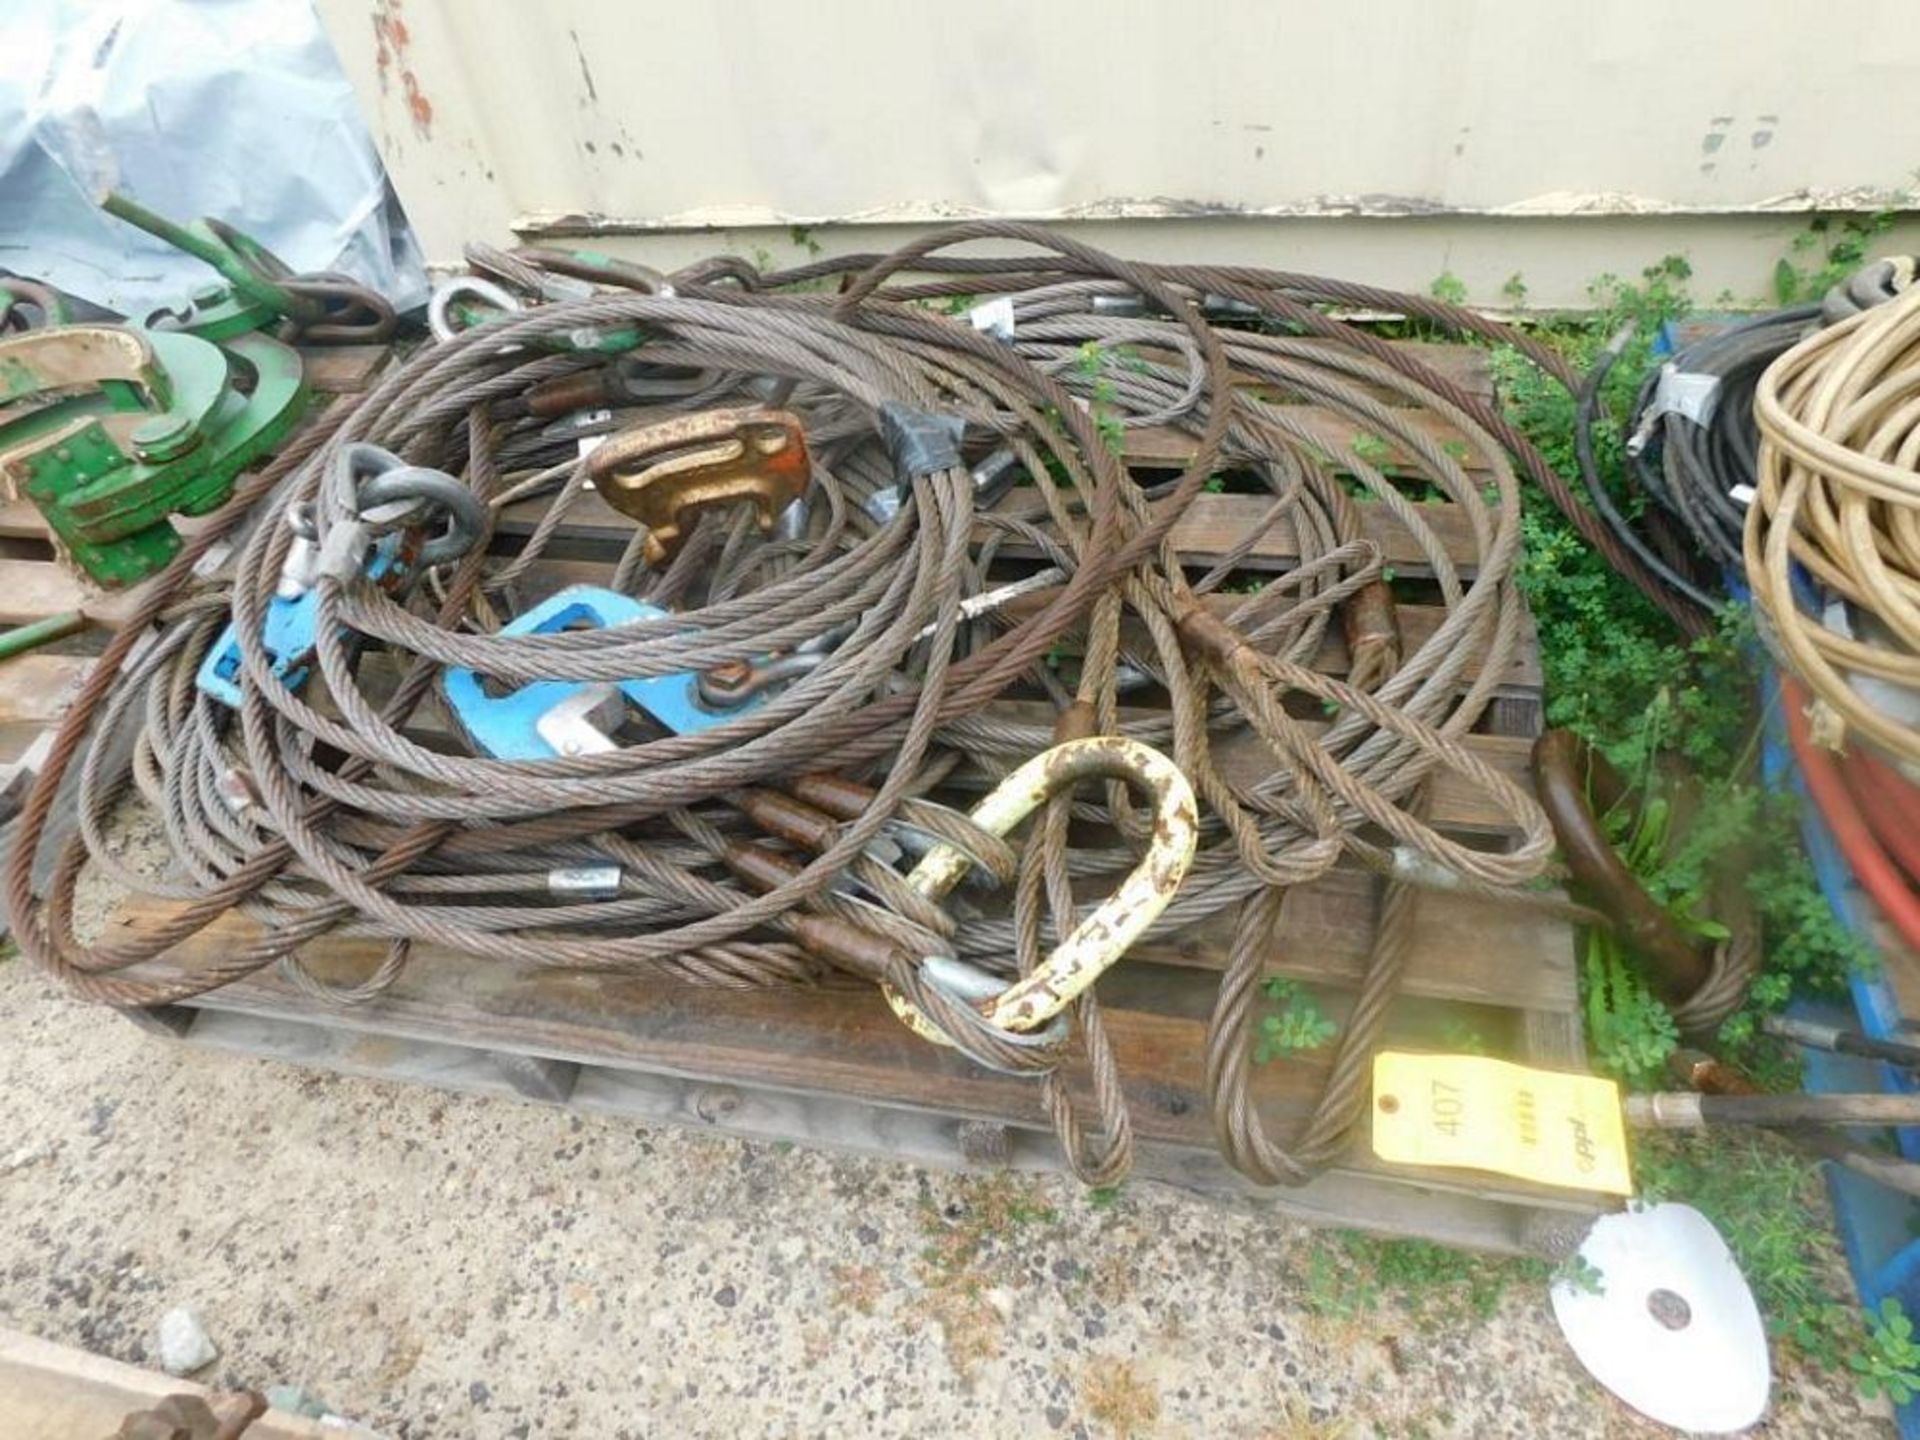 LOT: Assorted Lifting Cable Slings on (1) Pallet